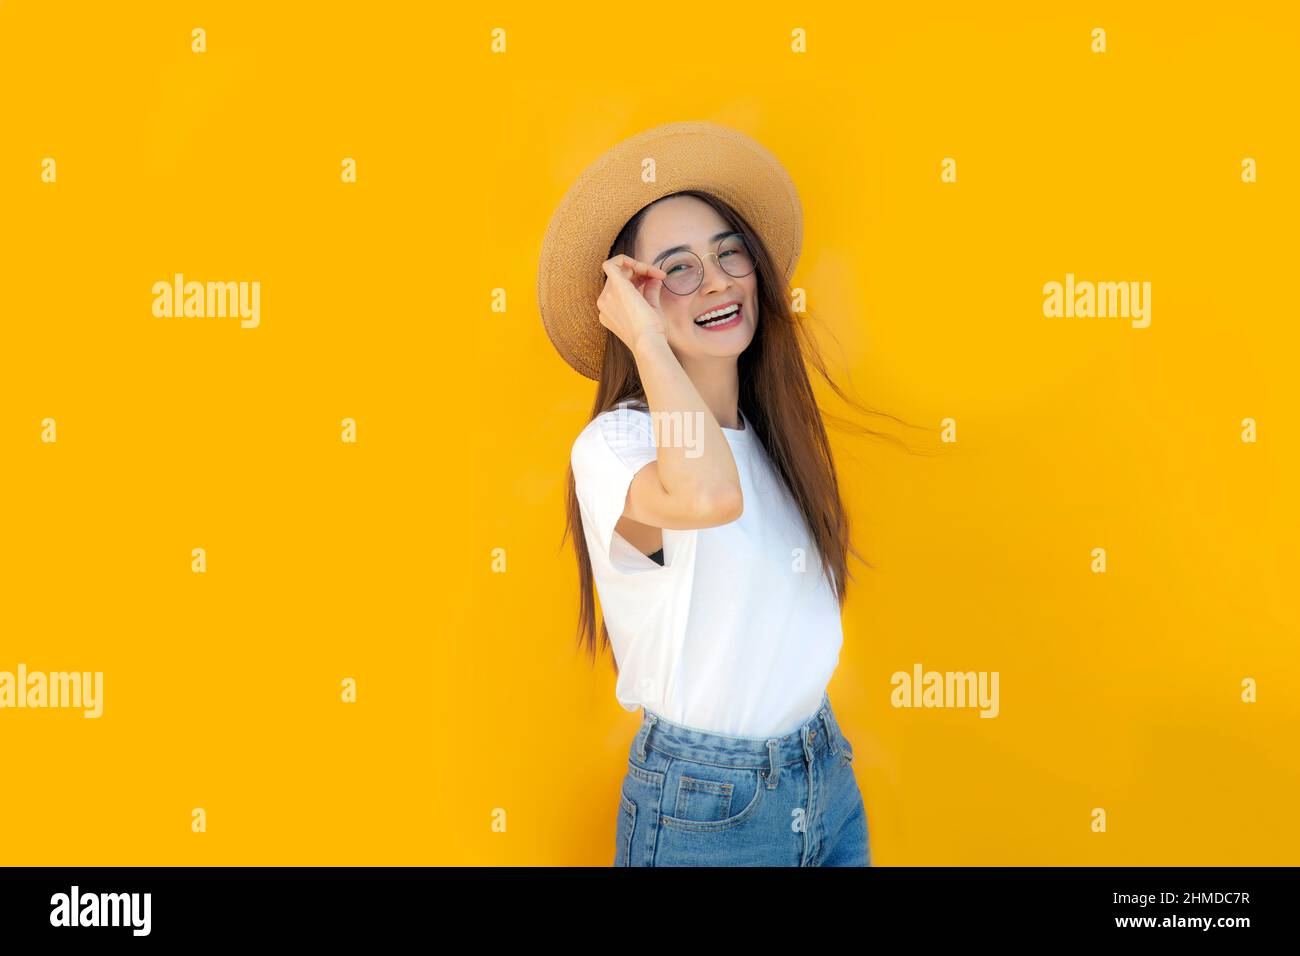 Portrait asian Woman against yellow Background.asian woman wearing glass, rattan hat, white shirt and blue jeans on yellow background for advertising Stock Photo